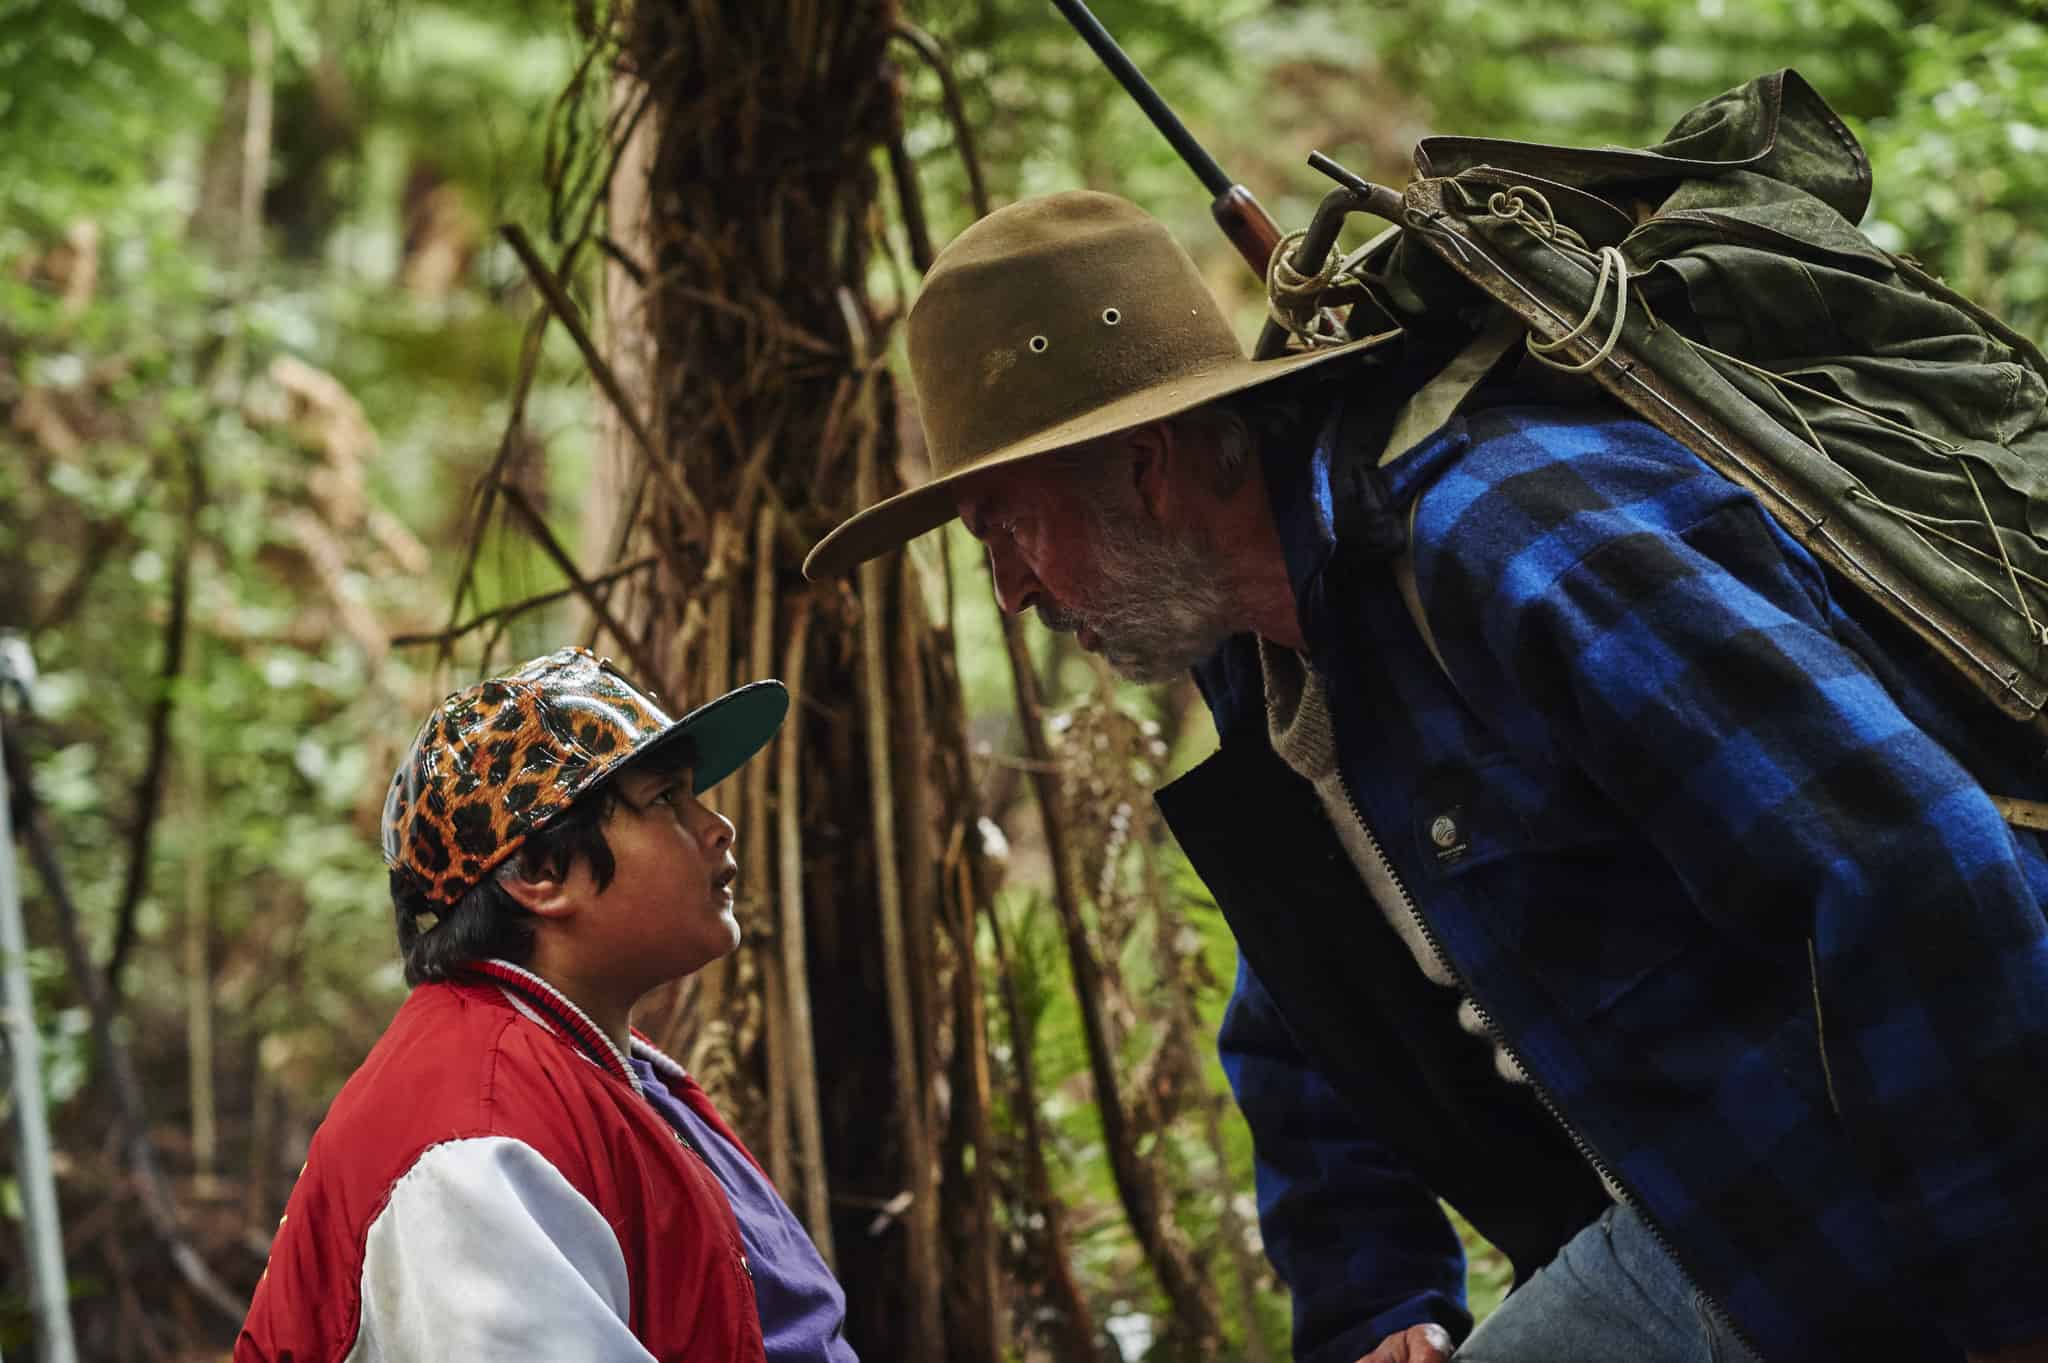 A young boy and a man talk in the woods in this image from Piki Films